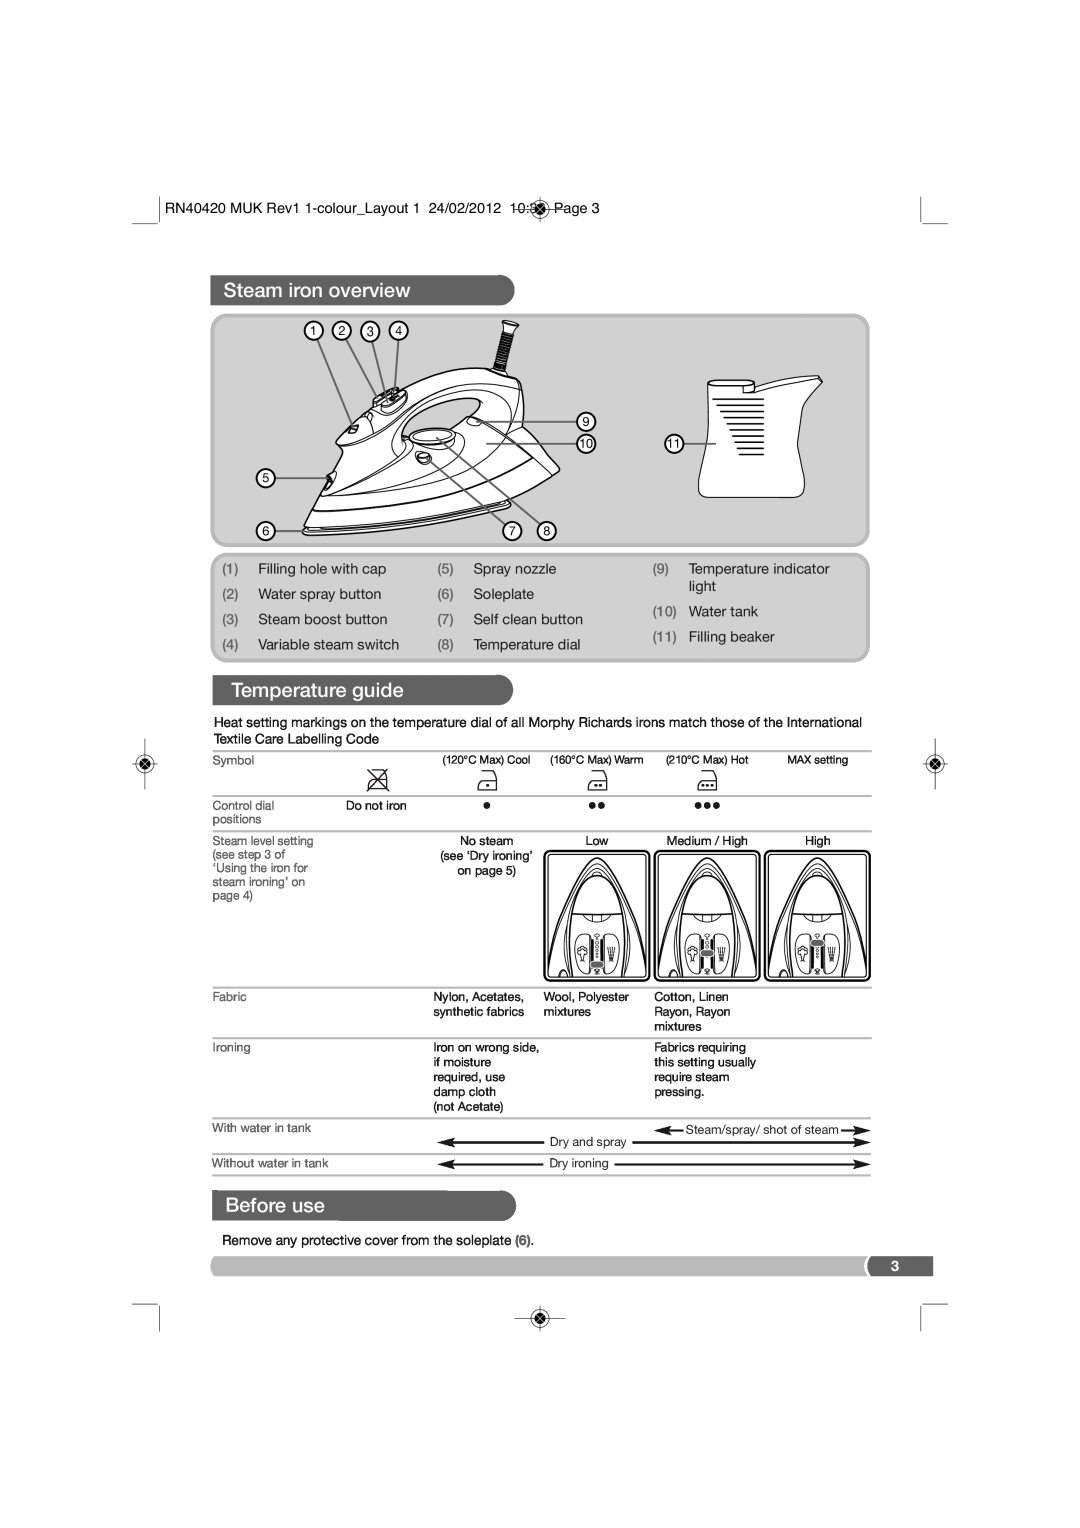 Morphy Richards RN40420MUK manual Steam iron overview, Temperature guide, Before use 